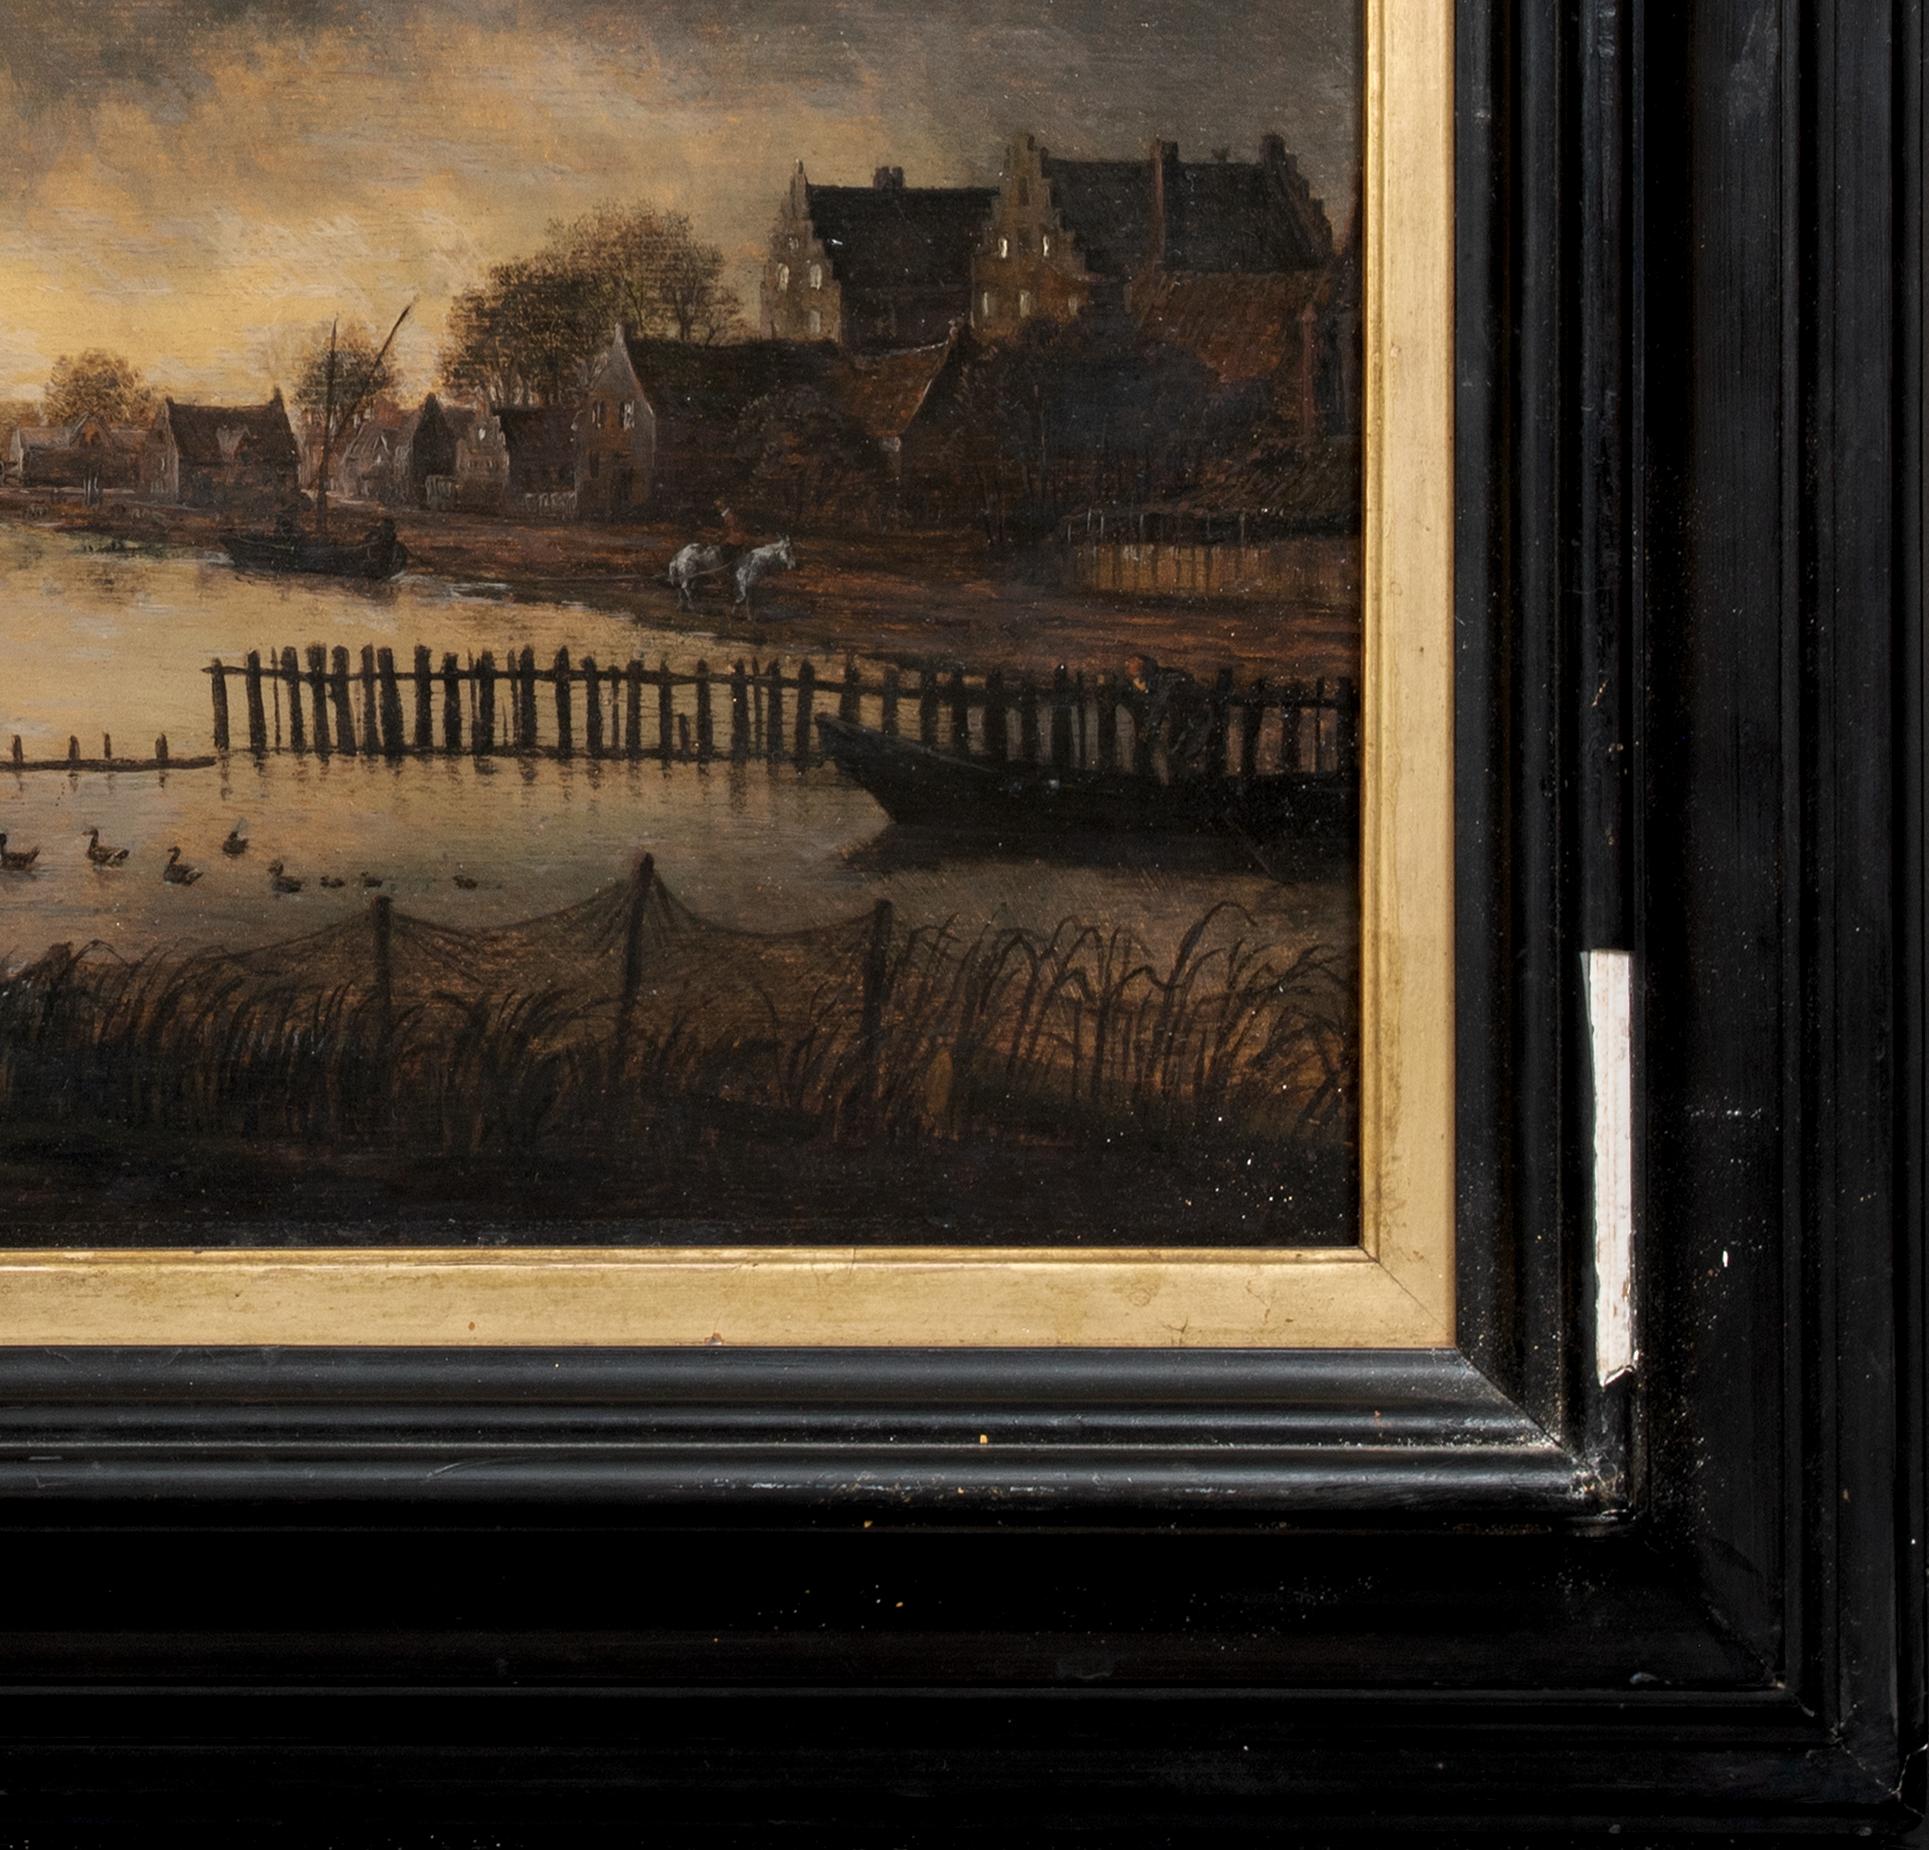 Moonlit River Landscape, 17th Century

Aert van der Neer (1603-1677)

17th Century Dutch old master moonlit river landscape, oil on canvas attributed to Aert Van Der Neer. Excellent quality and condition example of the prolific moonlit painters work